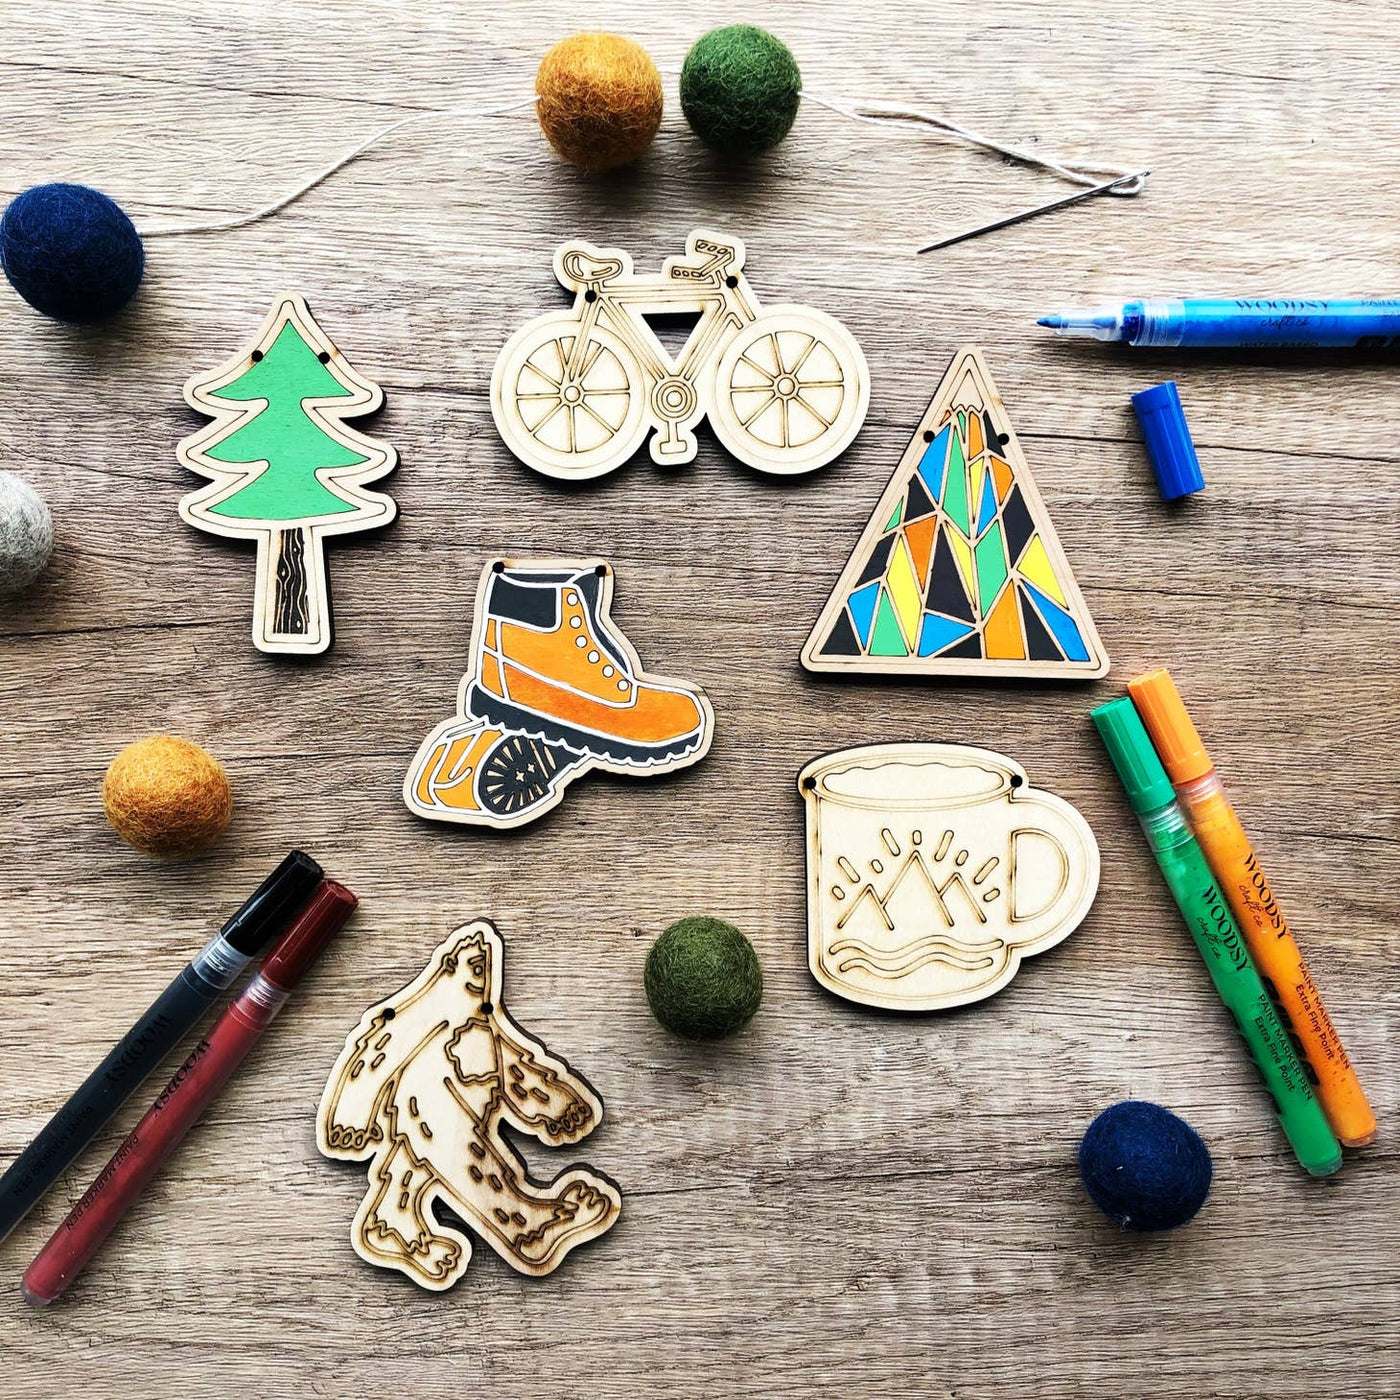 DIY Craft Kit - Adventure by Woodsy Craft Co.